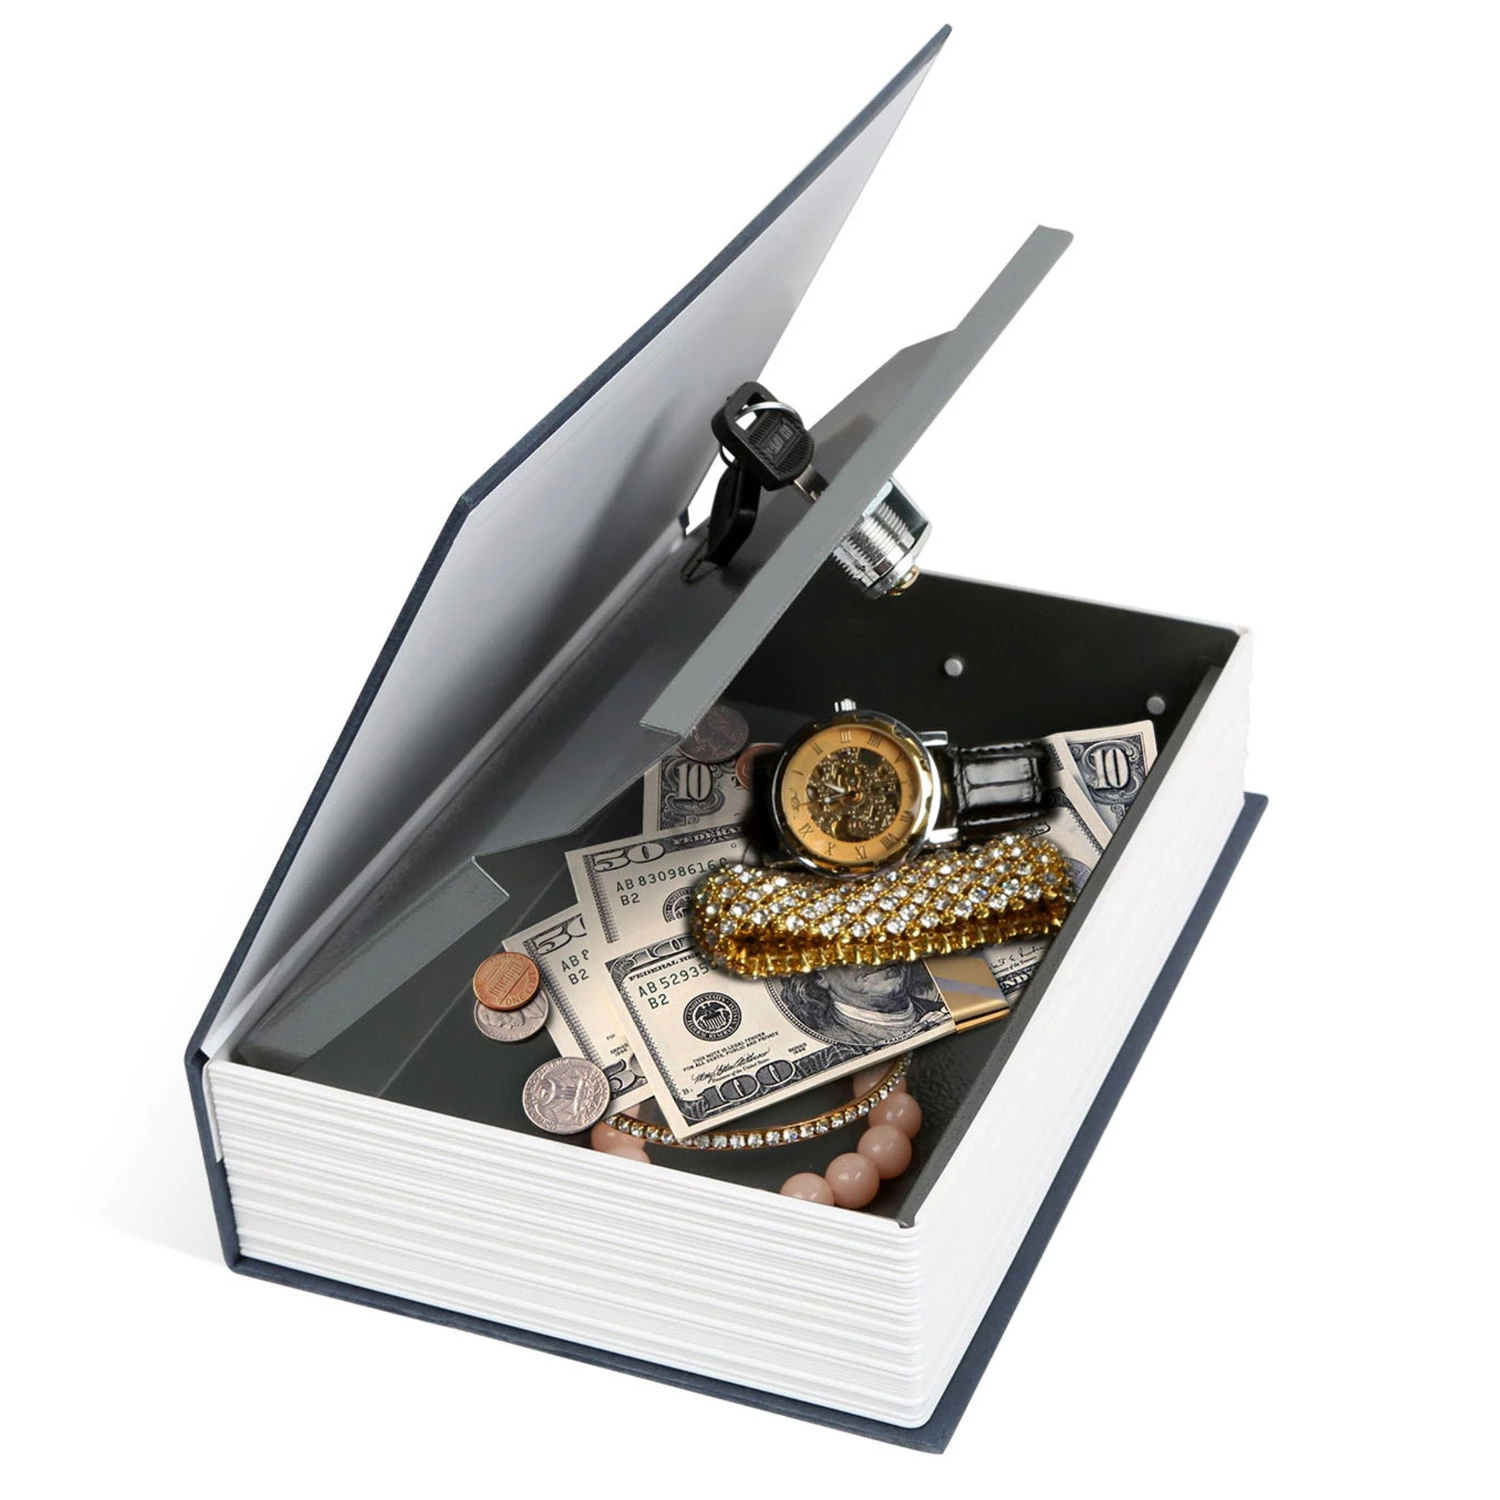 Dictionary Safe - Metal Box with Key Lock, Ample Capacity